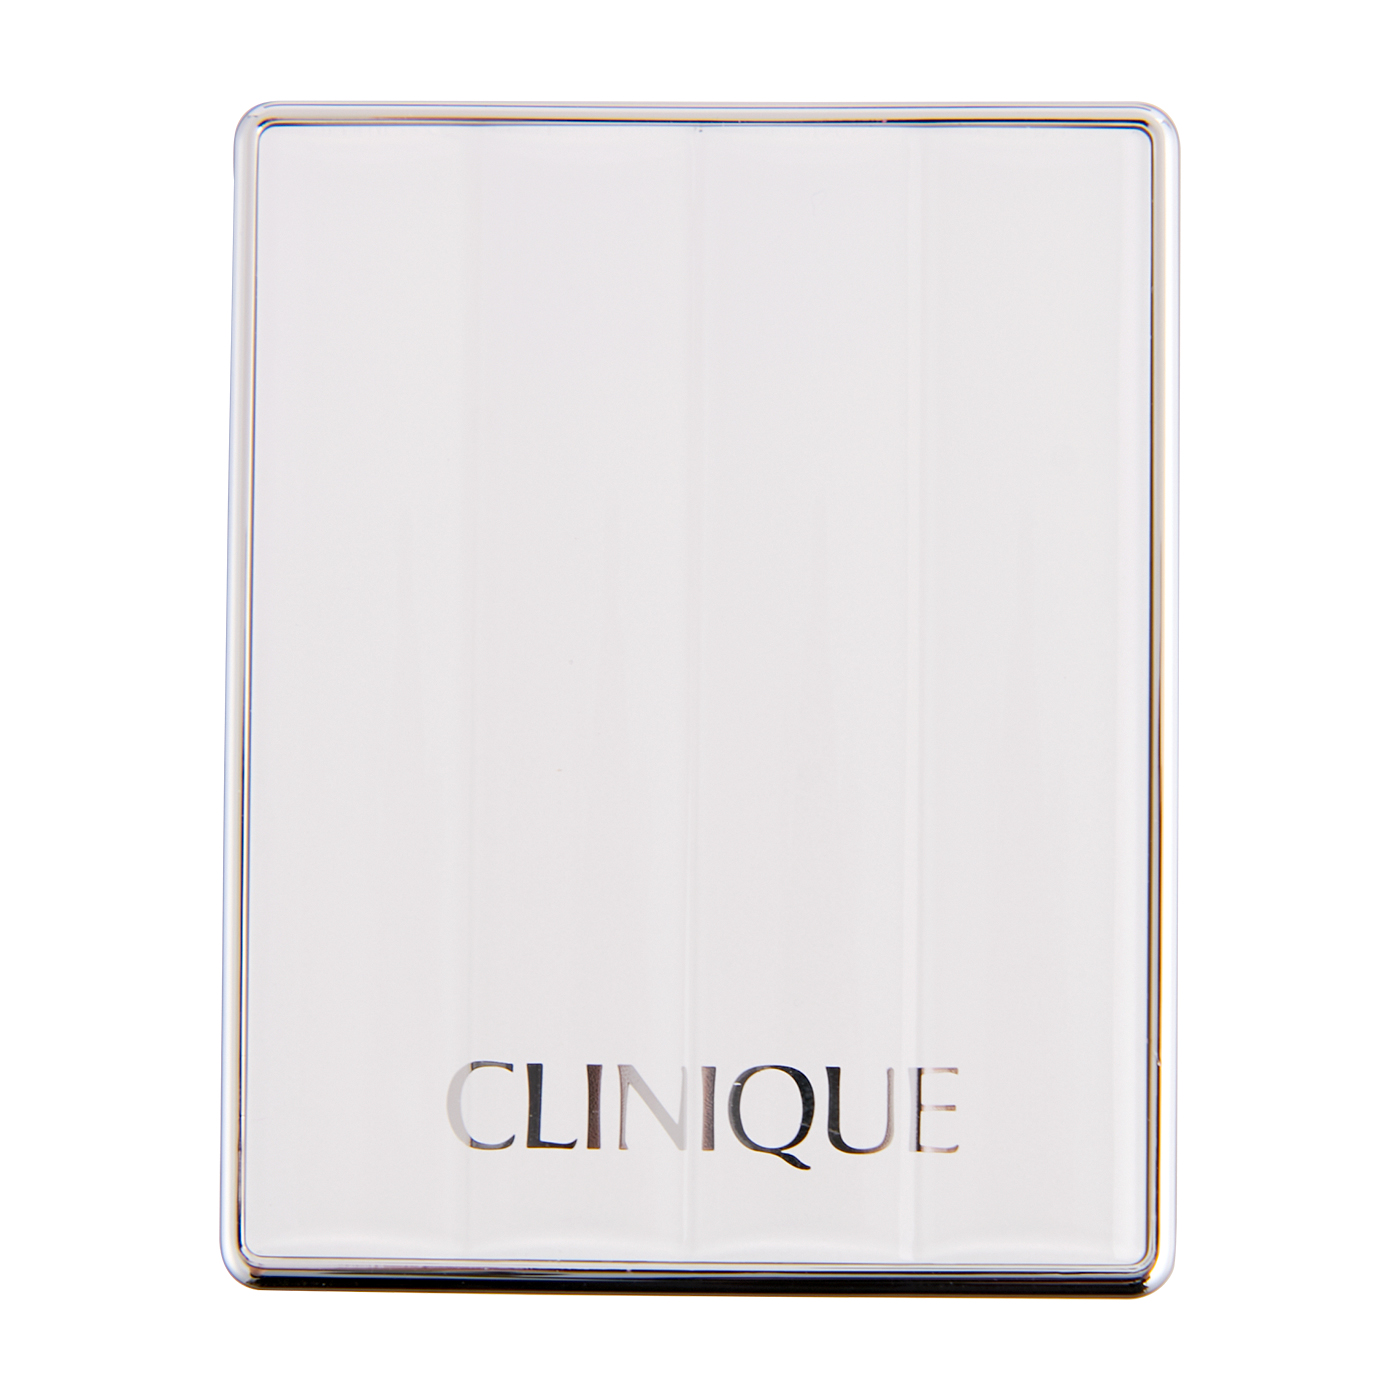 CLINIQUE クリニーク スキン コンパクト メークアップ 29